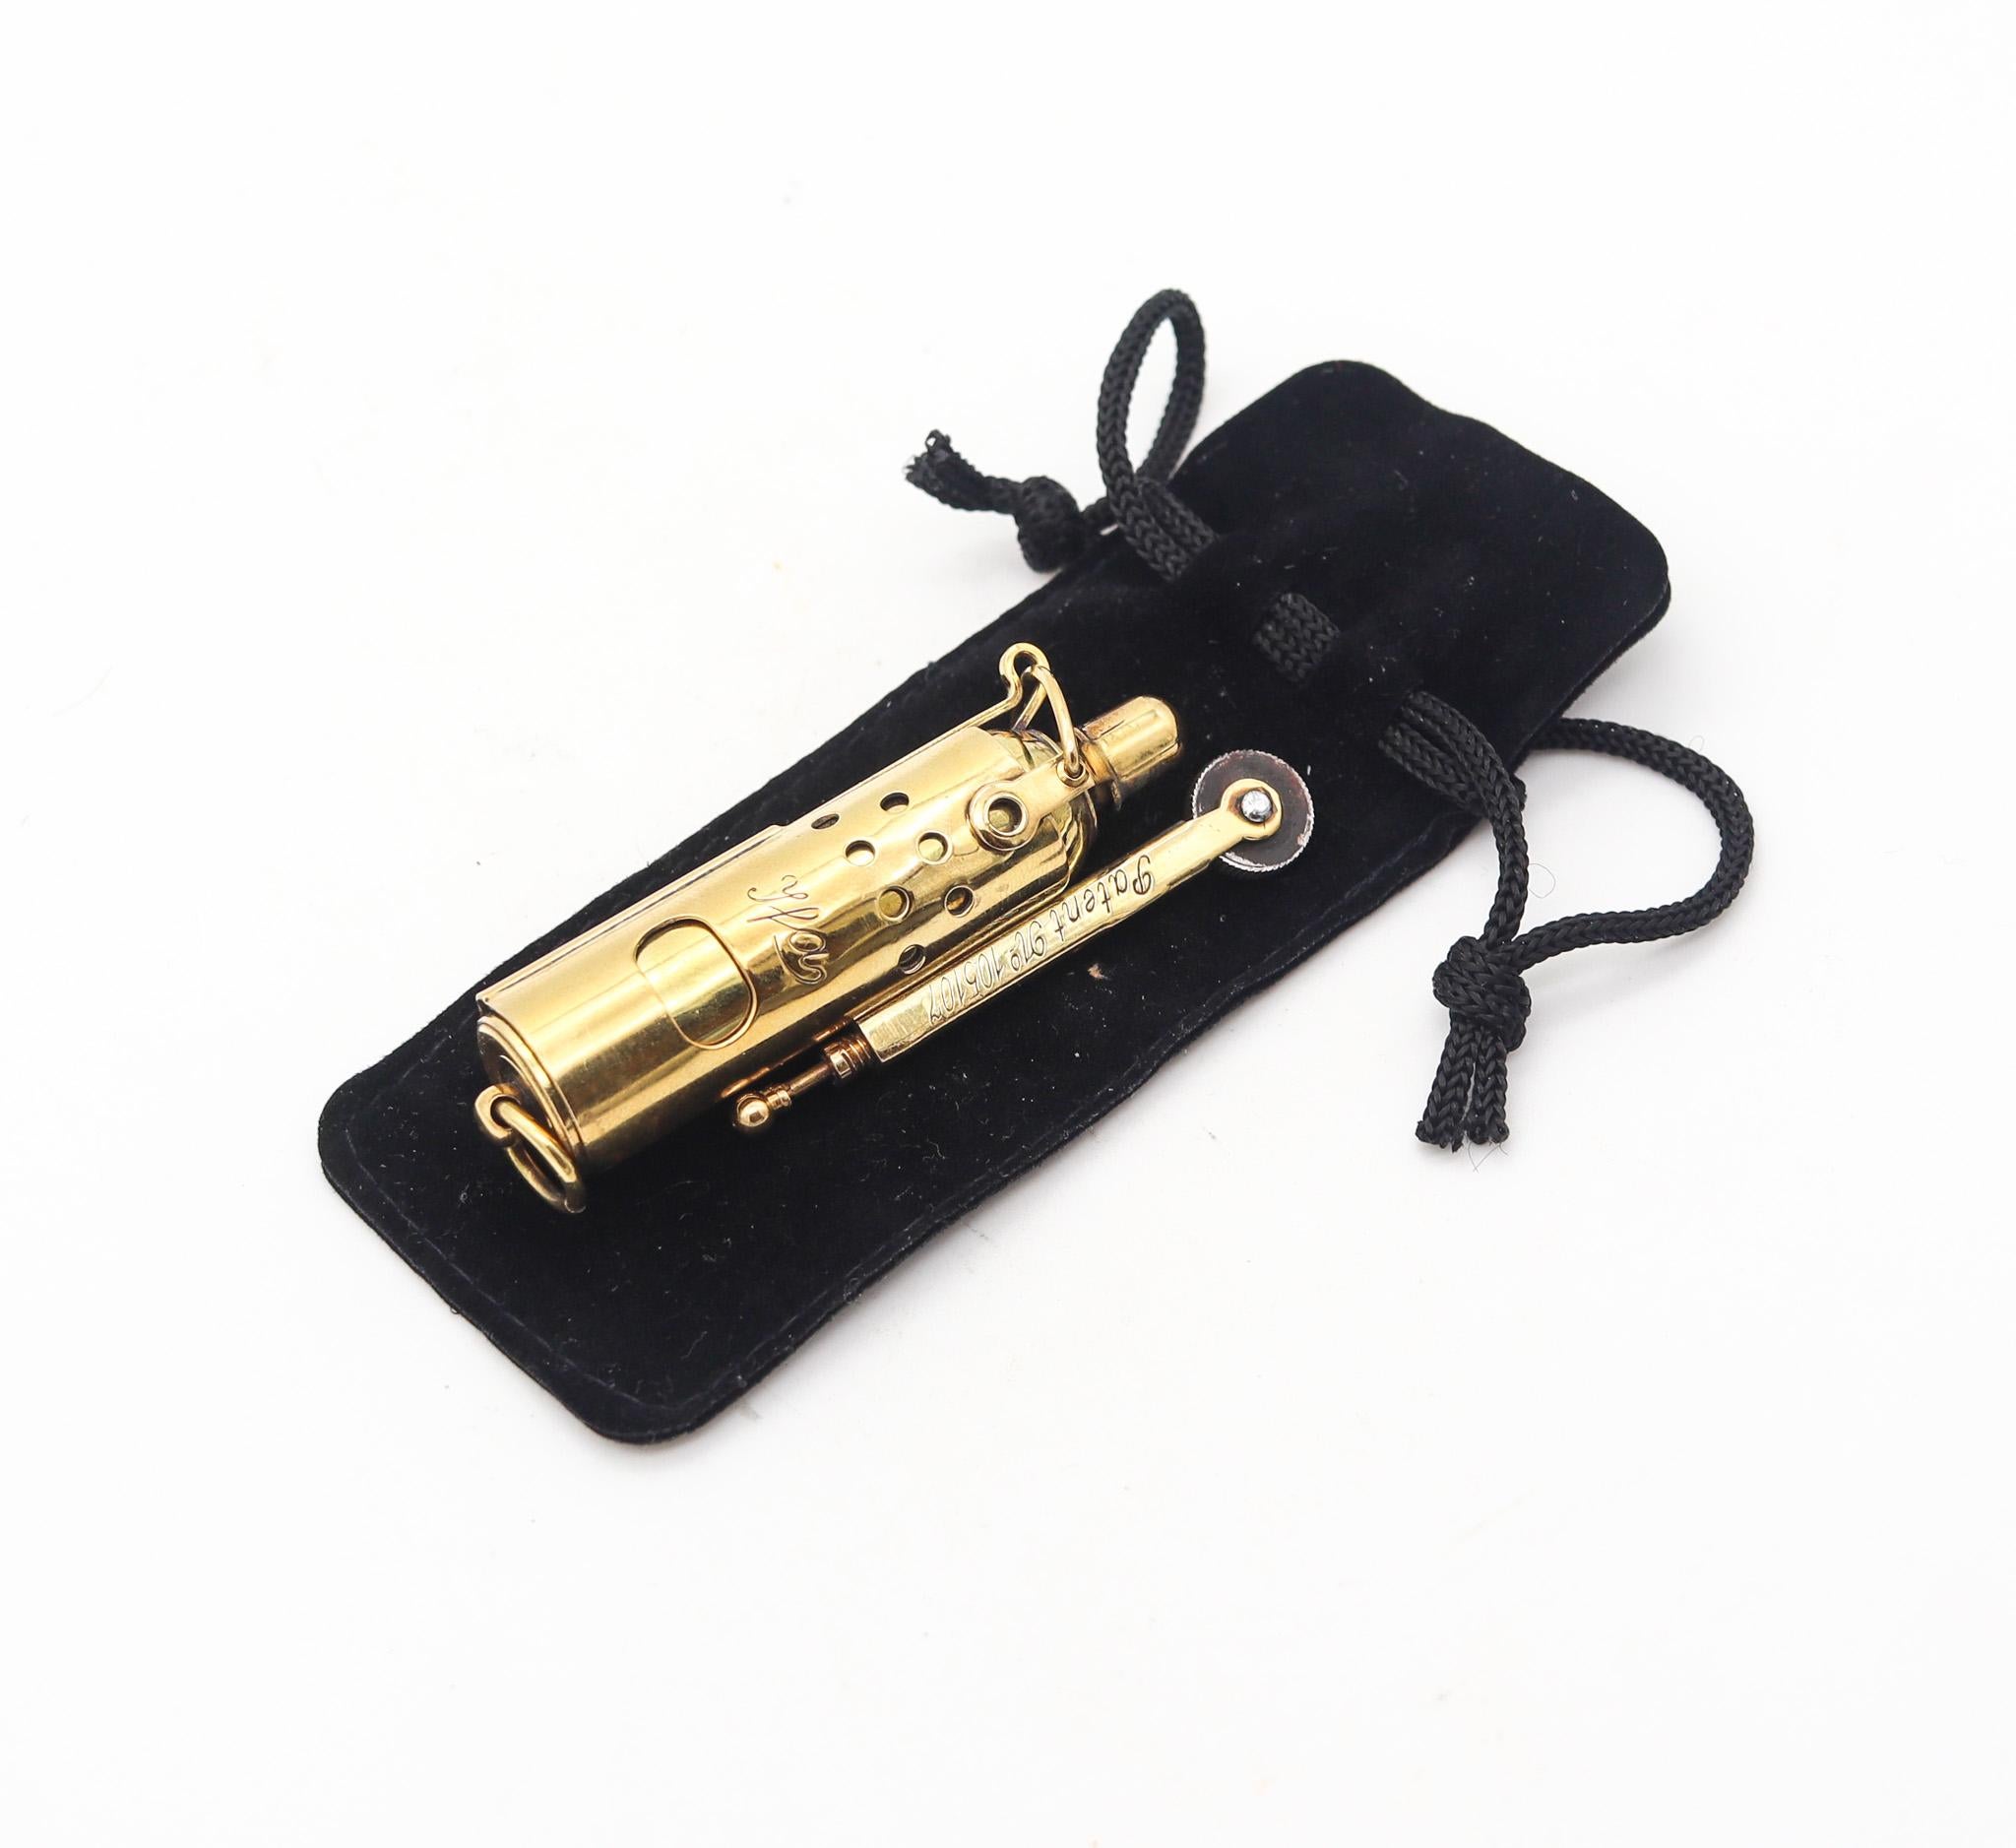 IMCO mechanical lighter made by the Julius Franz Meister Company.

This is an amazing authentic petrol lighter original from the art deco period. This industrial piece was originally designed and patented by Hans Silverknopf and was made in Austria